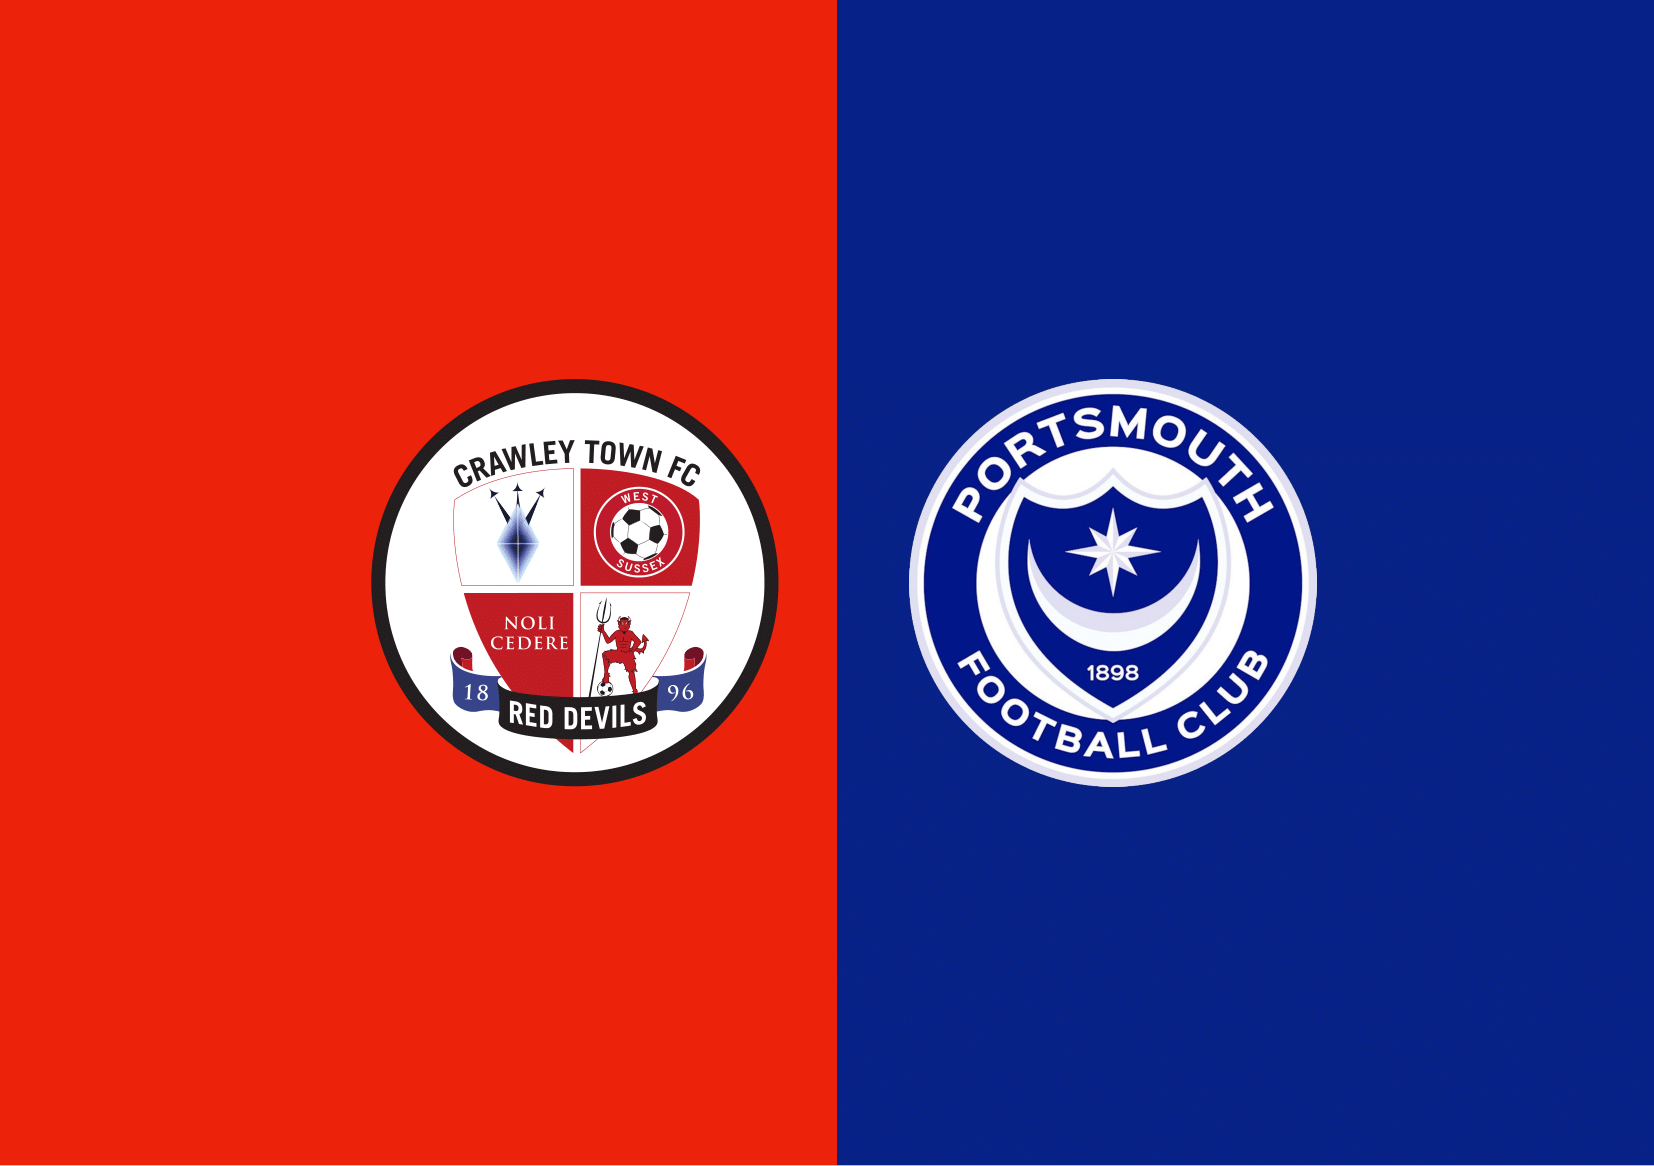 Crawley Town Fc On Twitter Officialpompey Reds Will Host Portsmouth In A Pre Season Friendly On The 27th July At The People S Pension Stadium More Information To Come Soon twitter